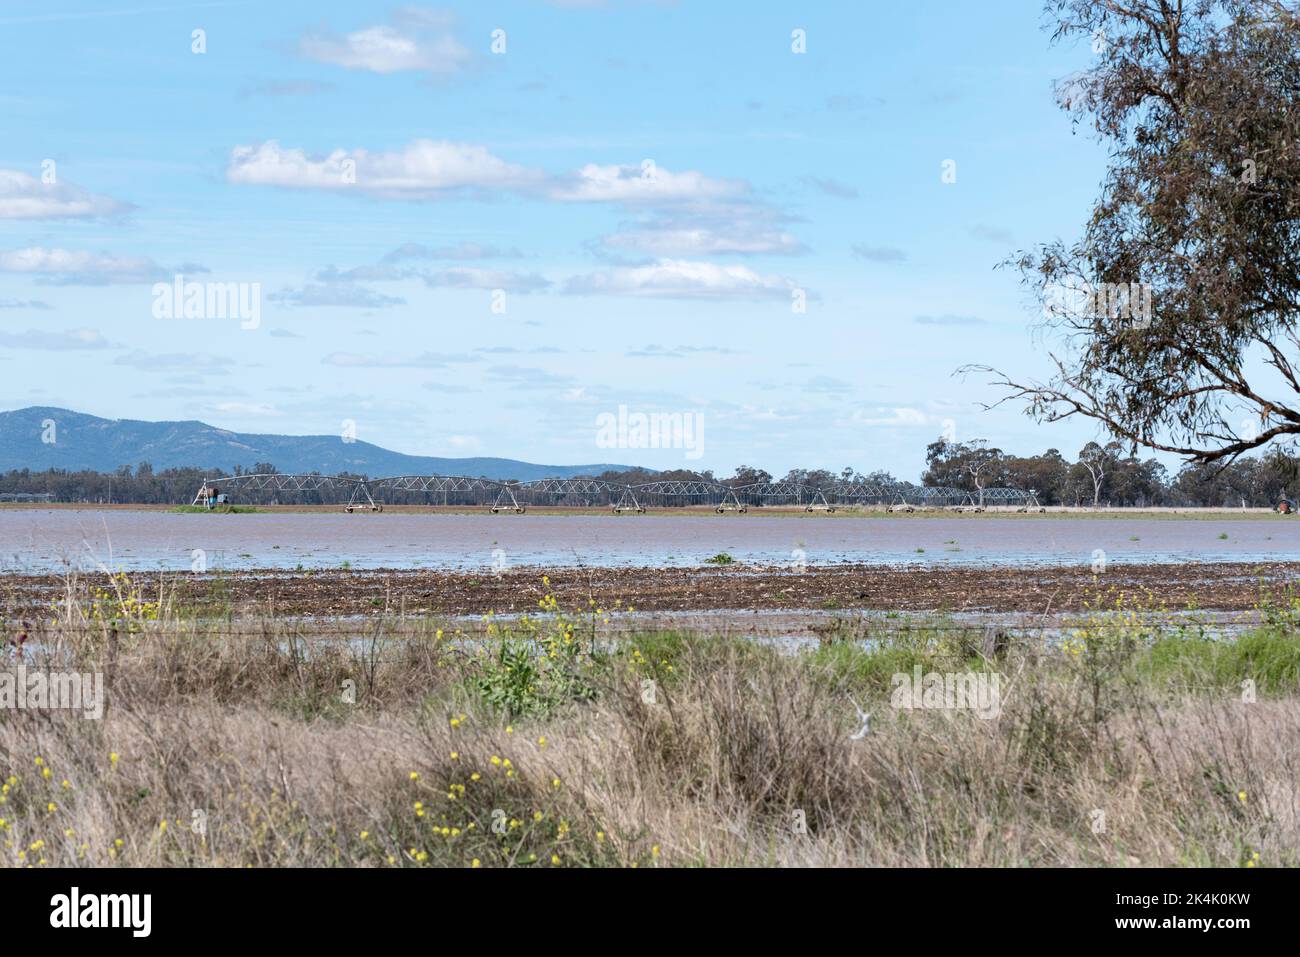 September 18, 2022, Kamilaroi Highway, Boggabri NSW, Australia: Flooded crop fields beside the road between Boggabri and Narrabri in north-western NSW. This and other nearby areas have been inundated after the Namoi River burst its banks. The road was being carefully monitored by local SES staff and was closed to all traffic later in the day due to increased water levels. Credit, Stephen Dwyer, Alamy Stock Photo